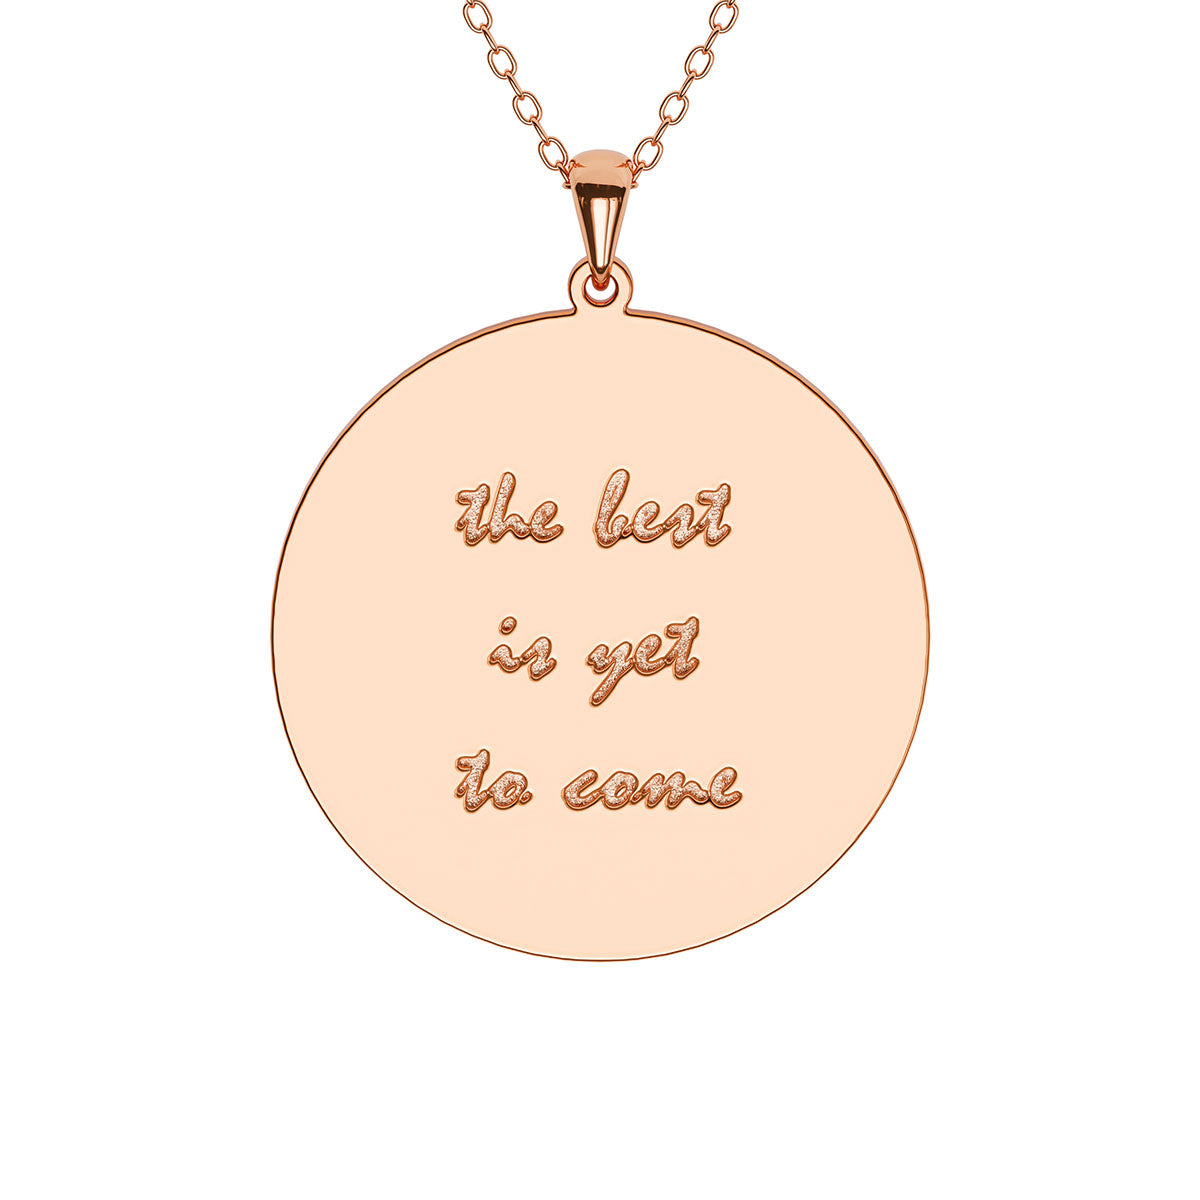 Personalized Round Necklace with Engraving